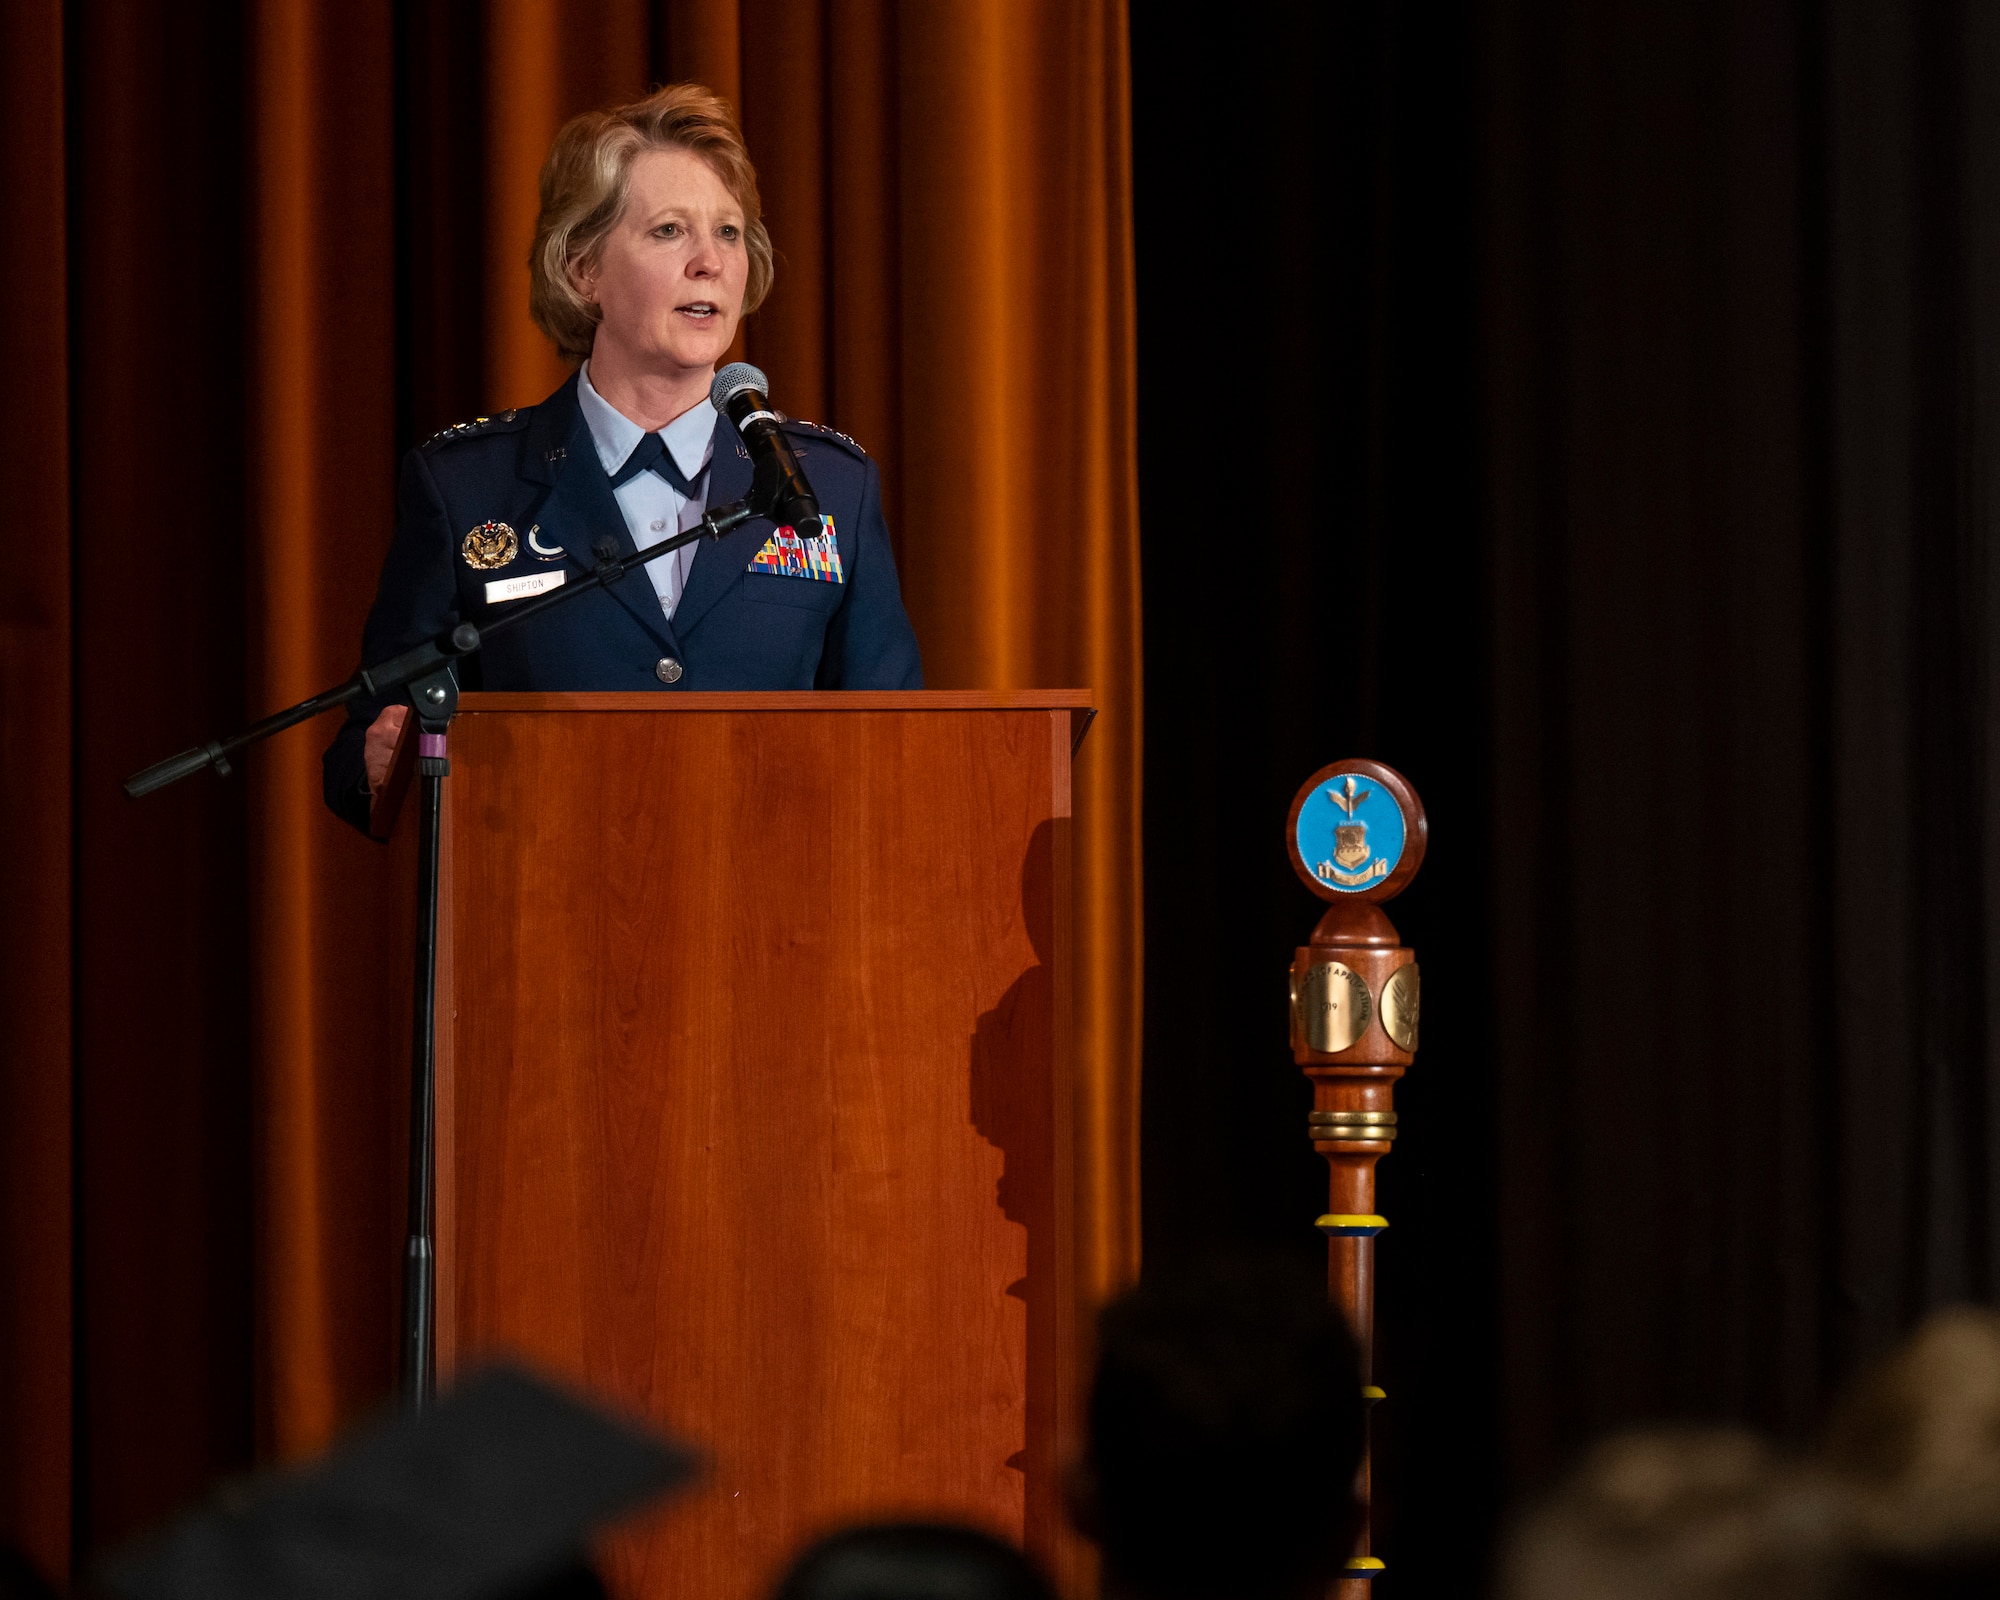 A woman in Air Force uniform stands behind a podium speaking.